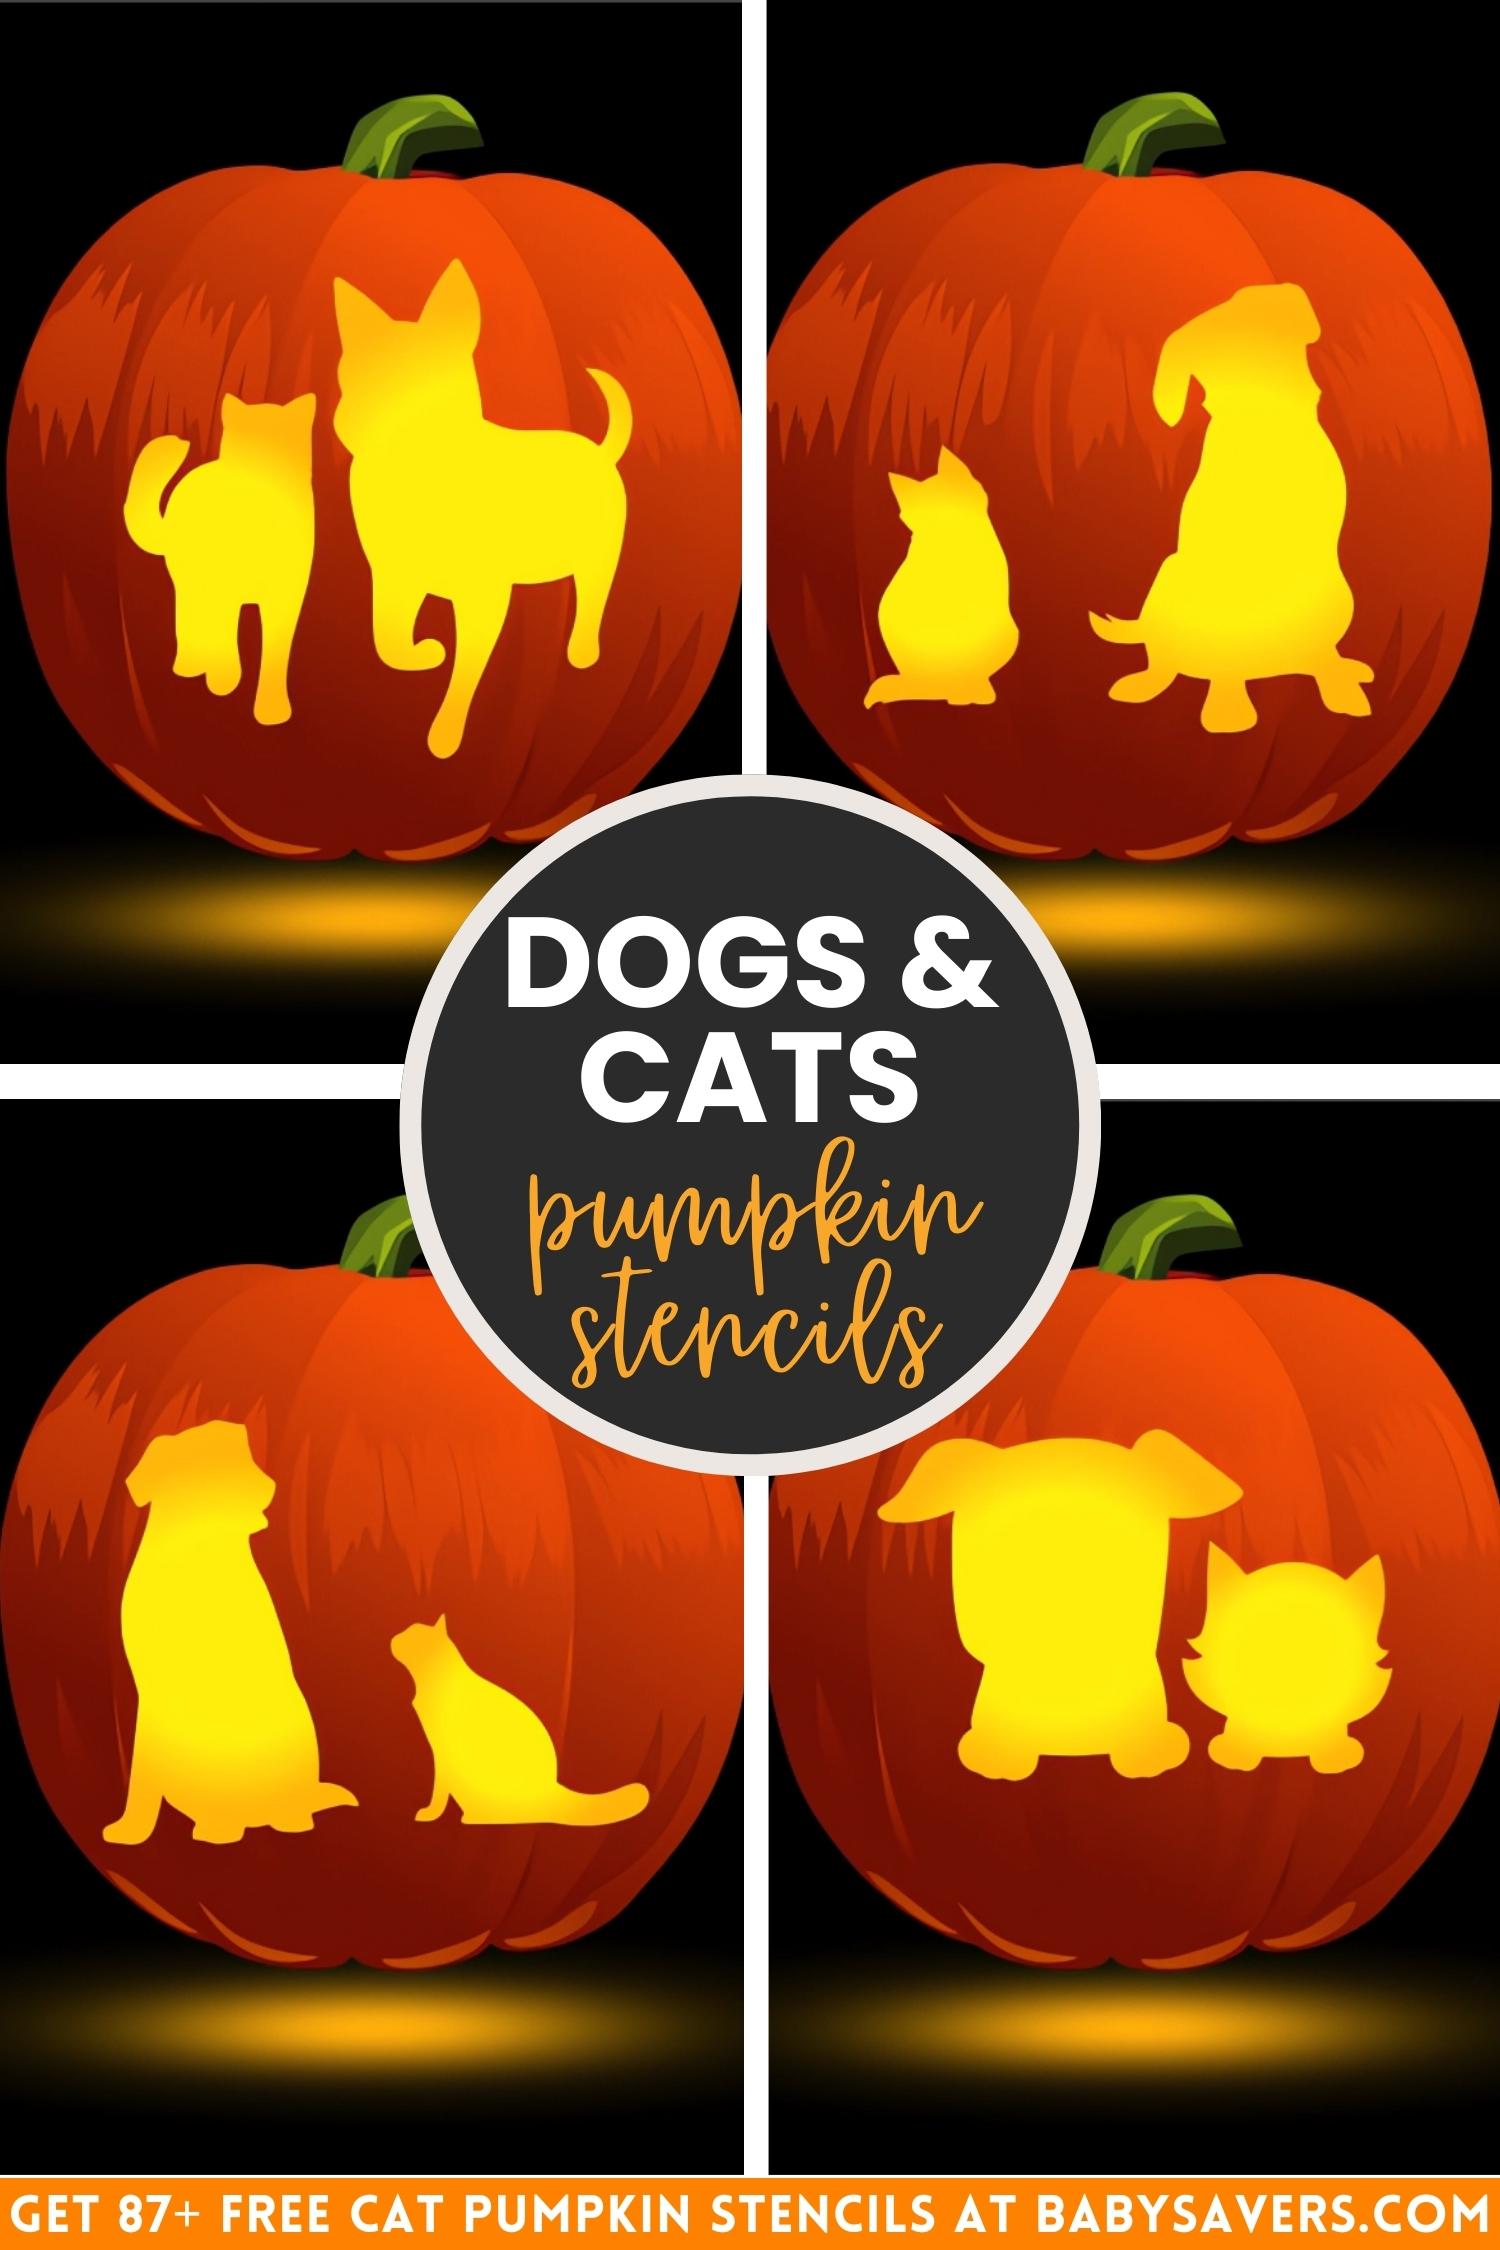 cat pumpkin stencils with printable templates of dogs and cats